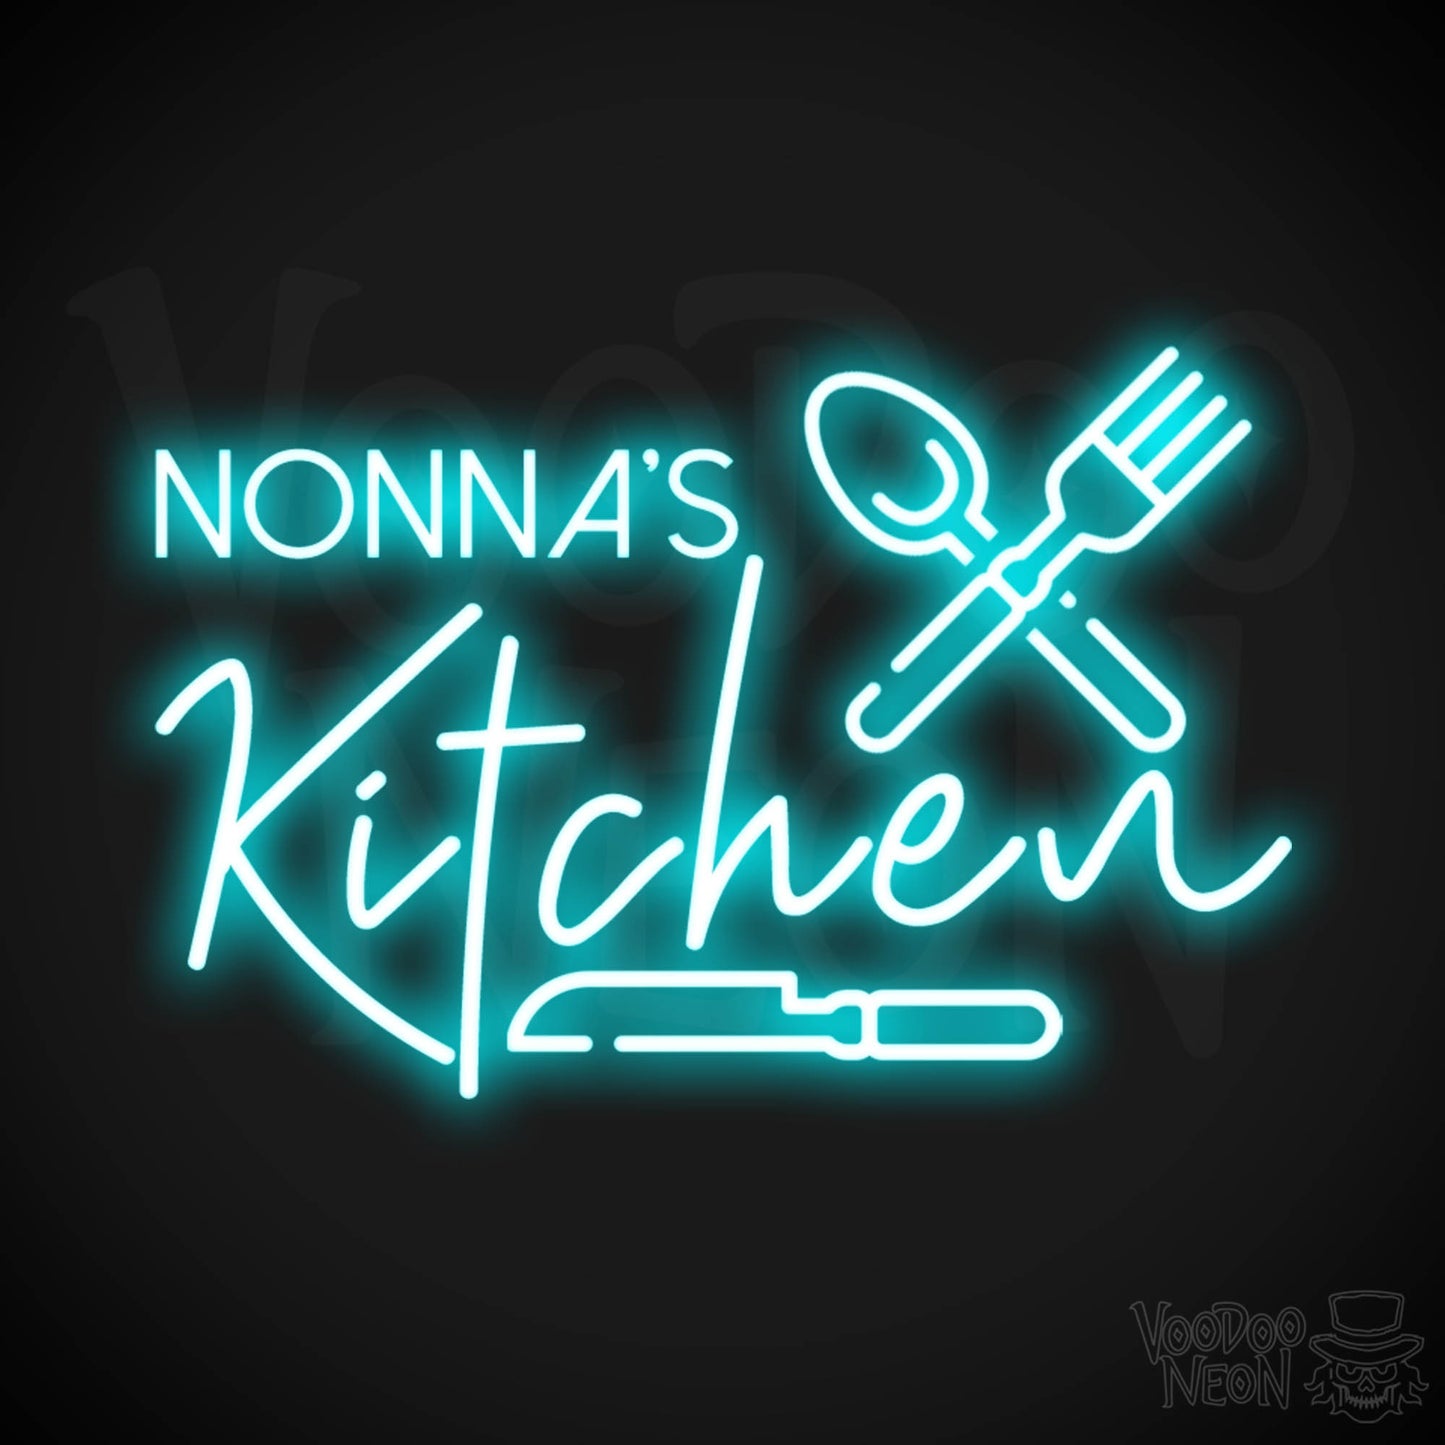 Nonna's Kitchen Neon Sign - Neon Nona's Kitchen Sign - Wall Art - Color Ice Blue